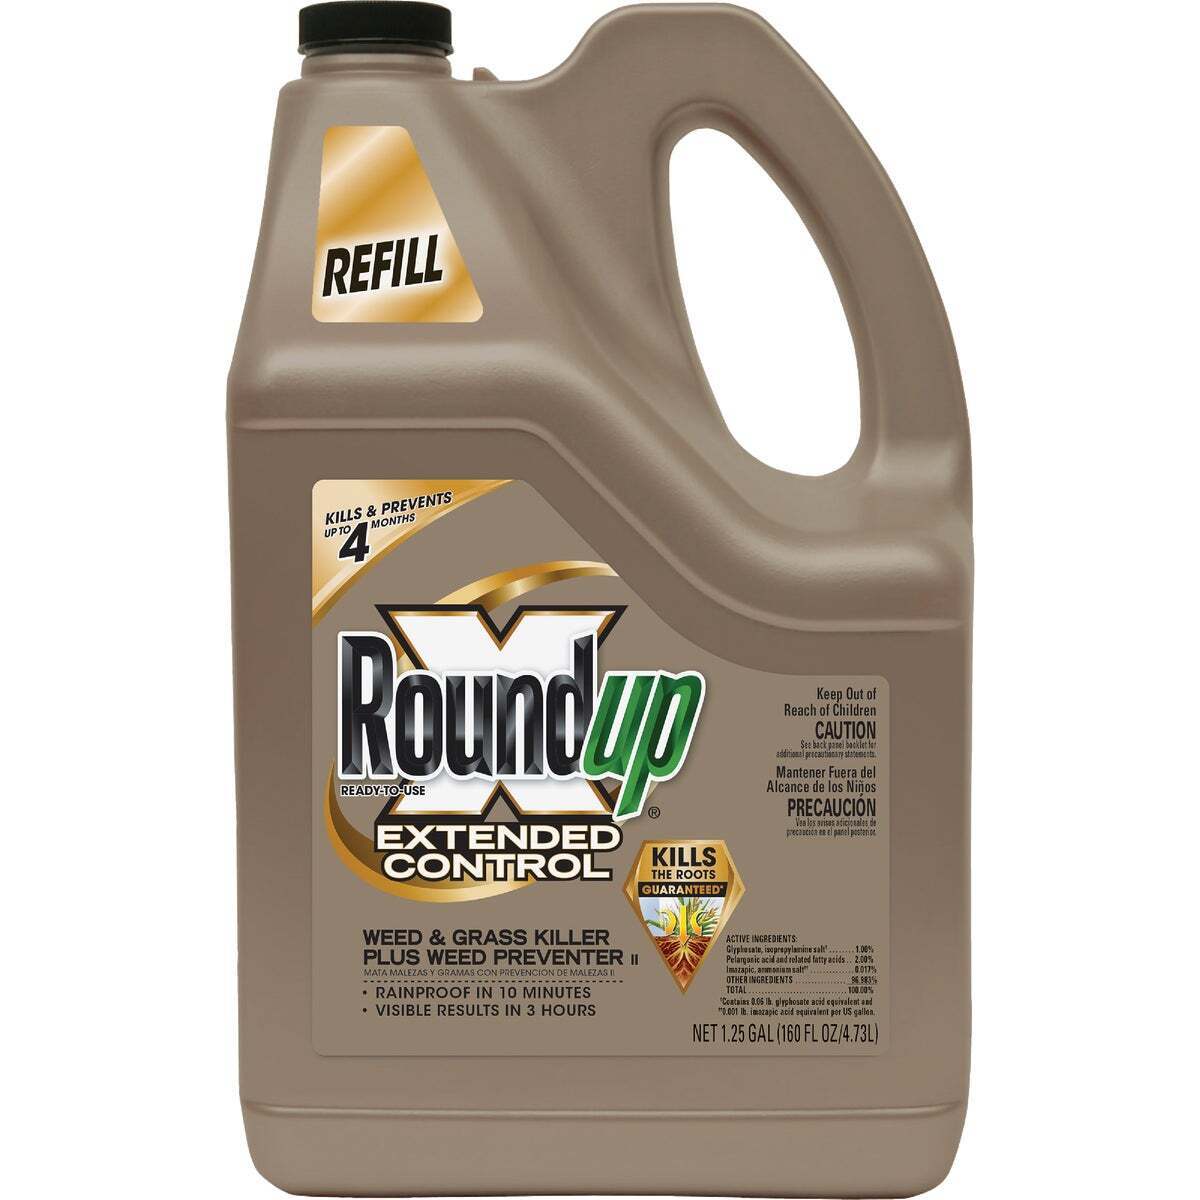 Extended Control Png Ref Ext Cntl Roundup 5708010 Pack Of 4 Roundup Extended